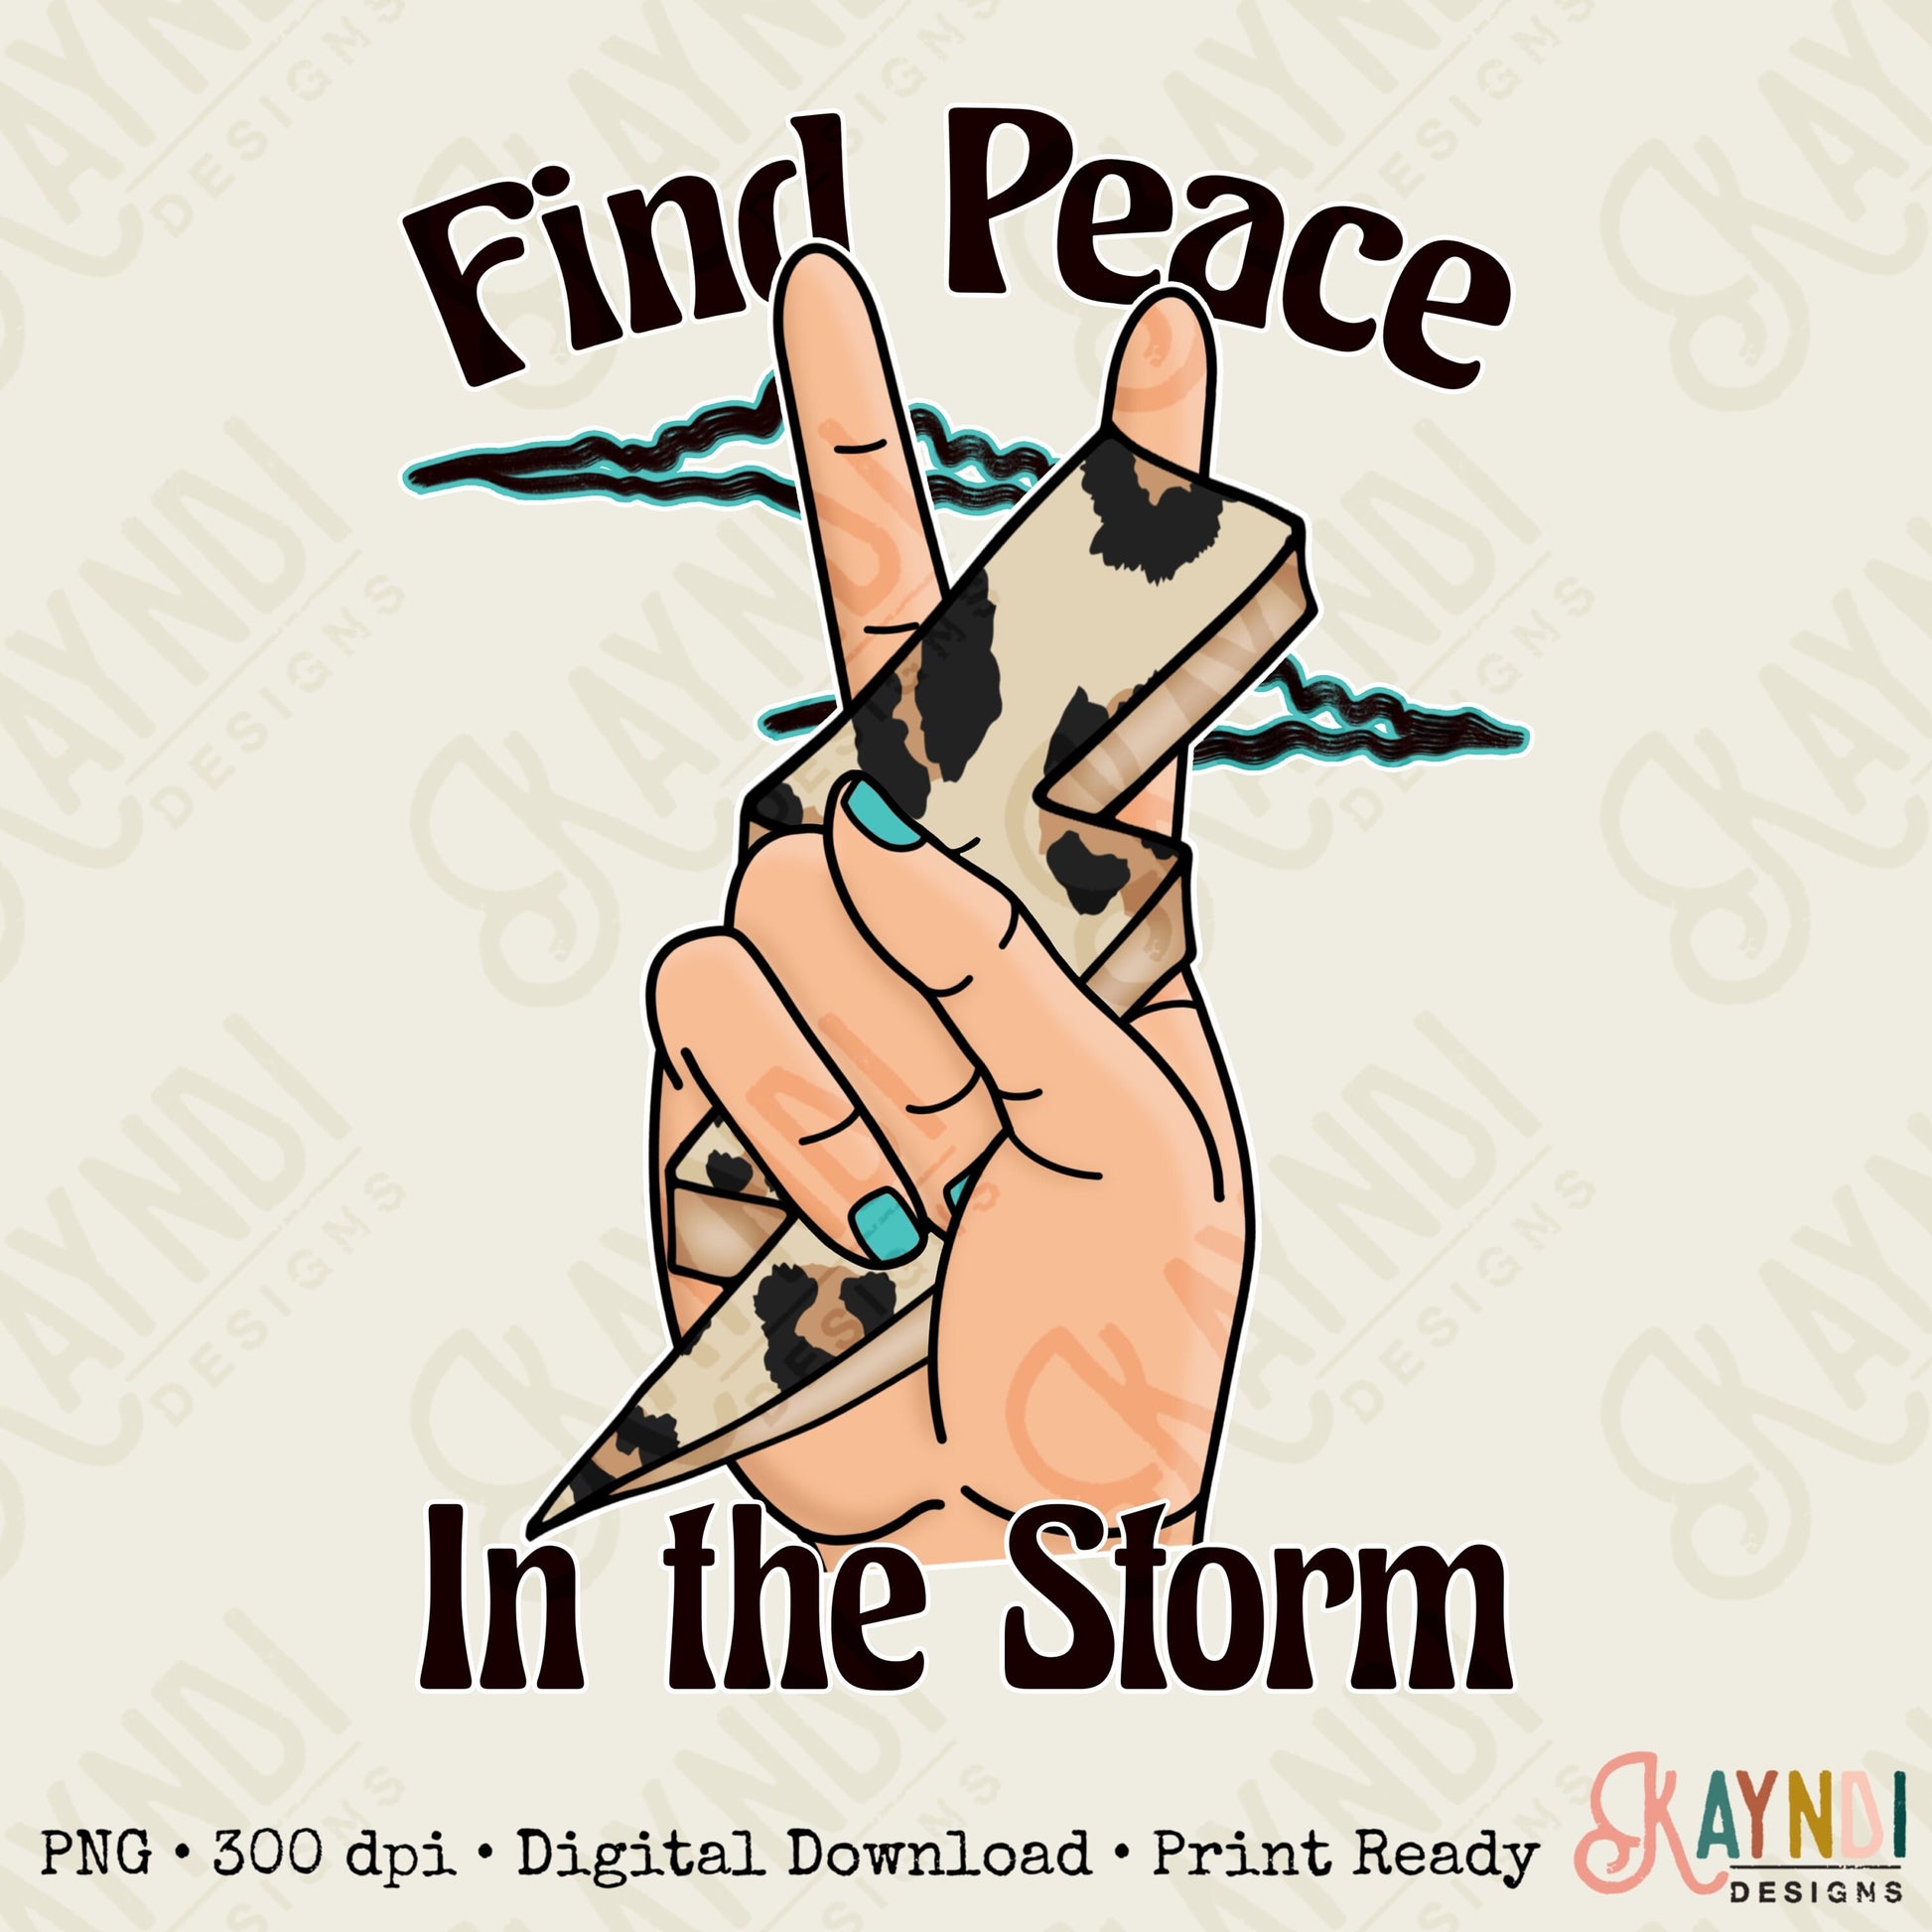 Find Peace in the Storm Sublimation Design PNG Digital Download Printable Mental Health Quote Peace Sign Hand Lightning Bolt Leopard 4